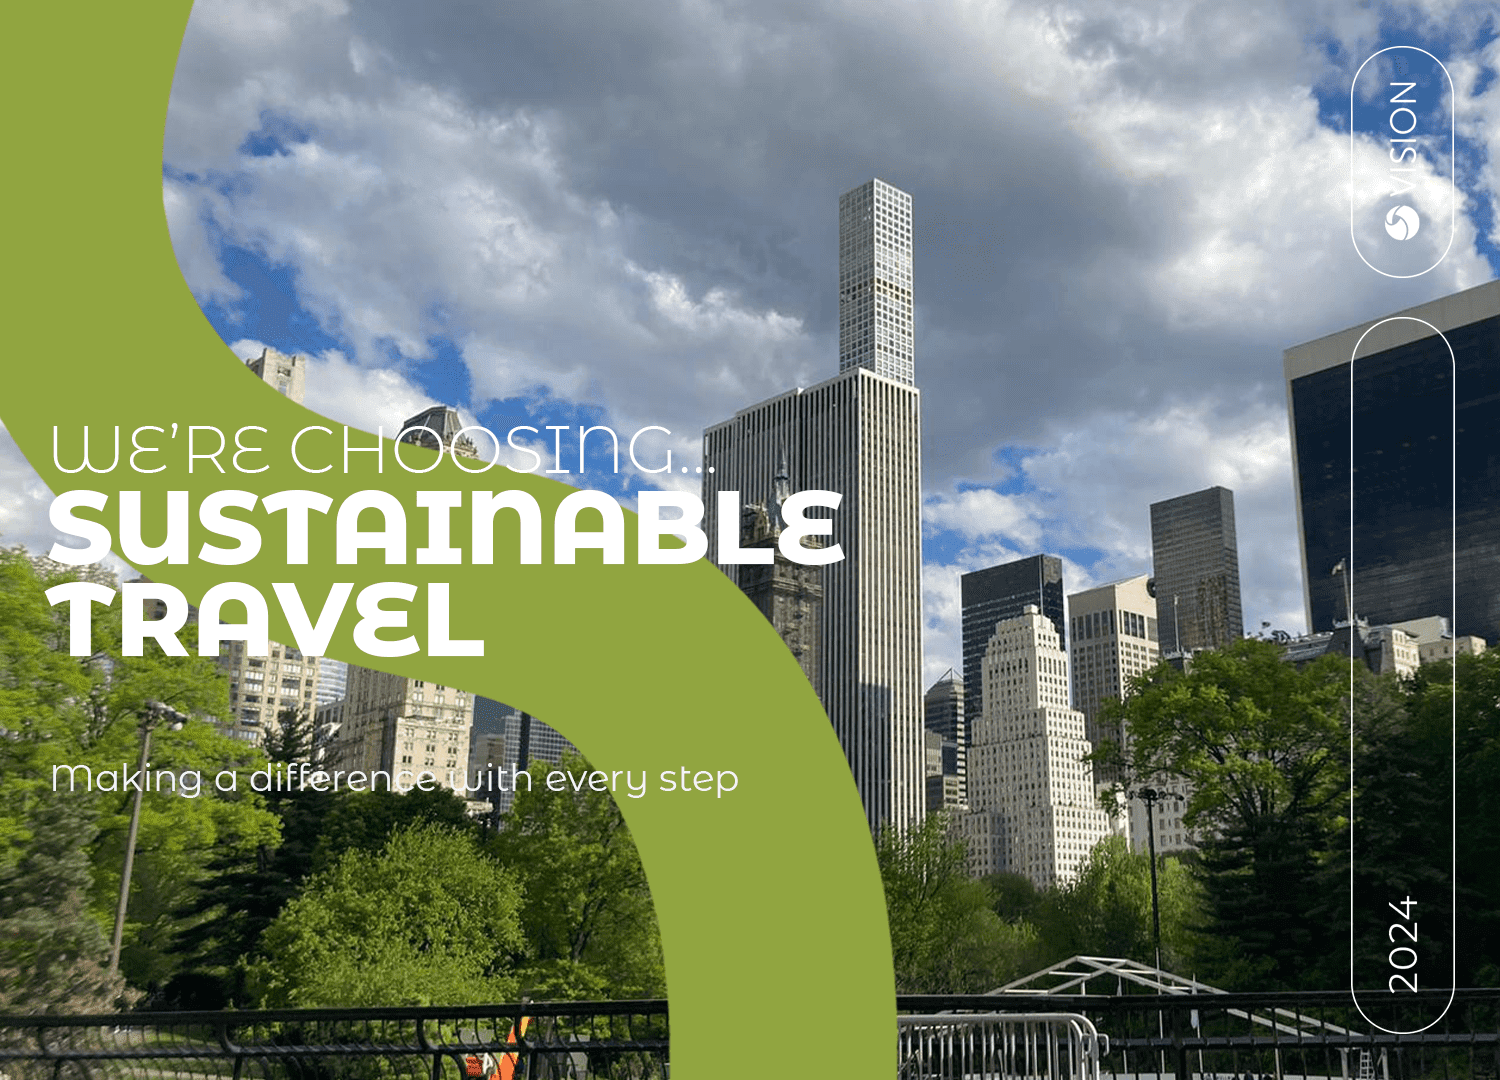 Fraser Donaldson's Five Small Steps Towards Travelling Sustainably